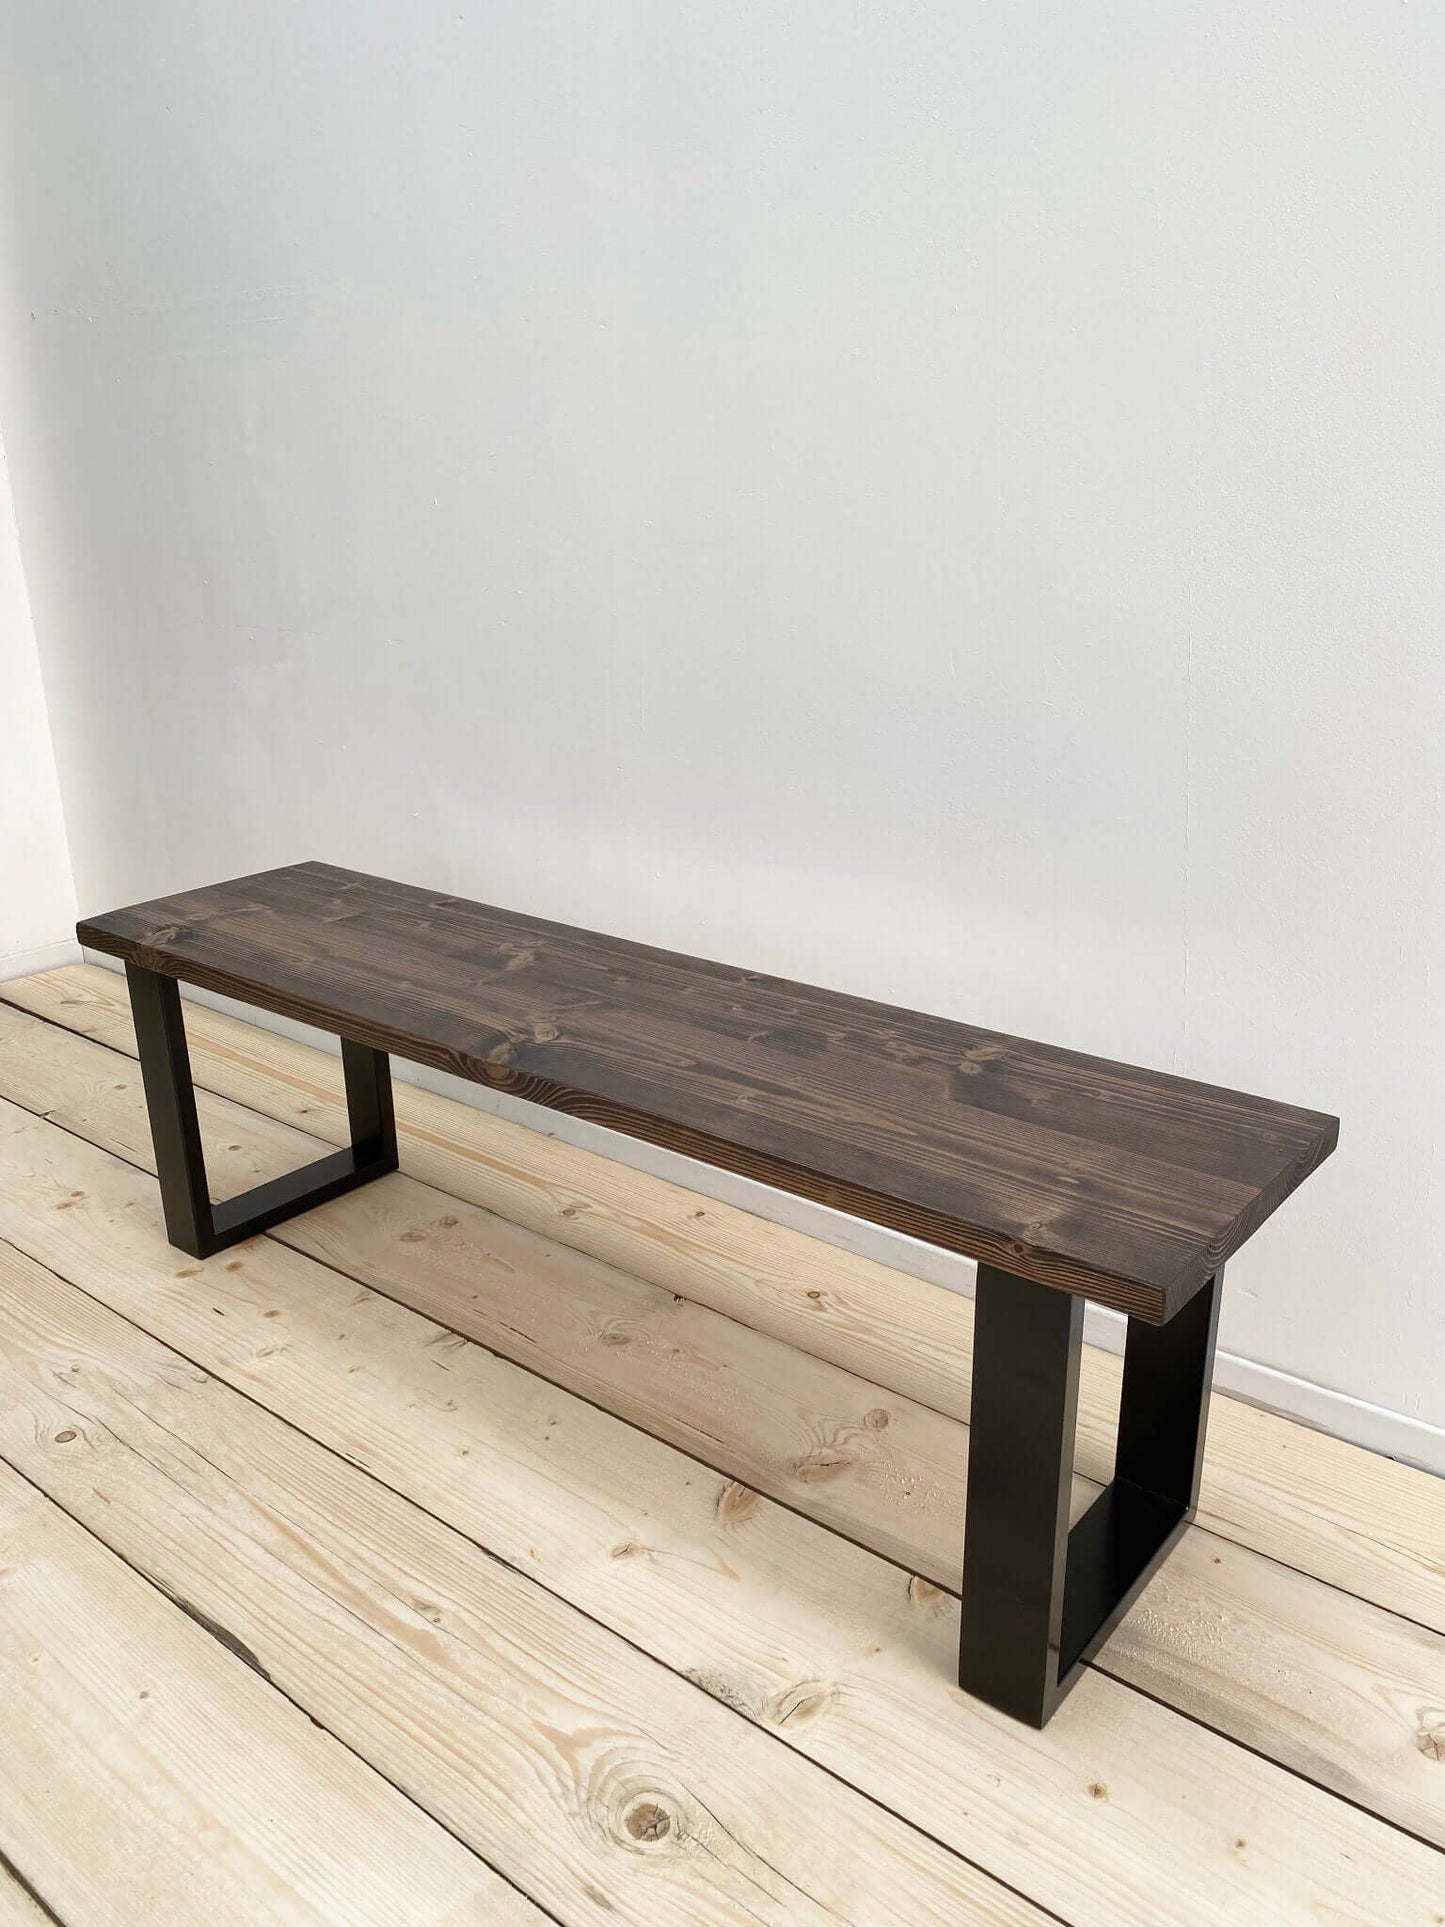 Reclaimed wood bench seat with industrial legs.